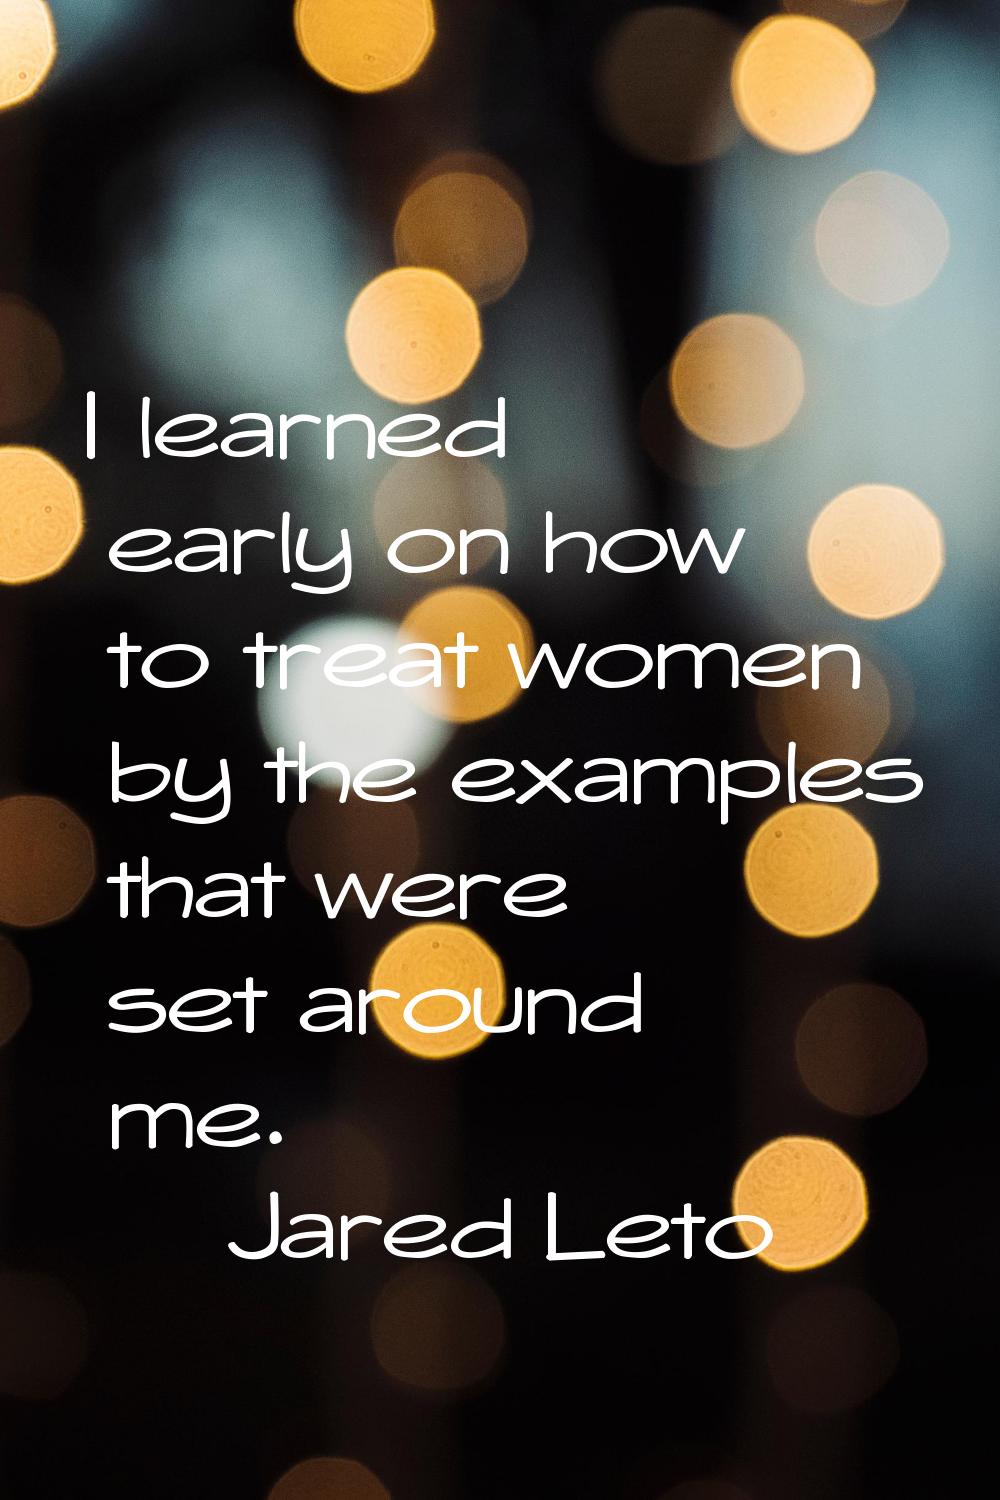 I learned early on how to treat women by the examples that were set around me.